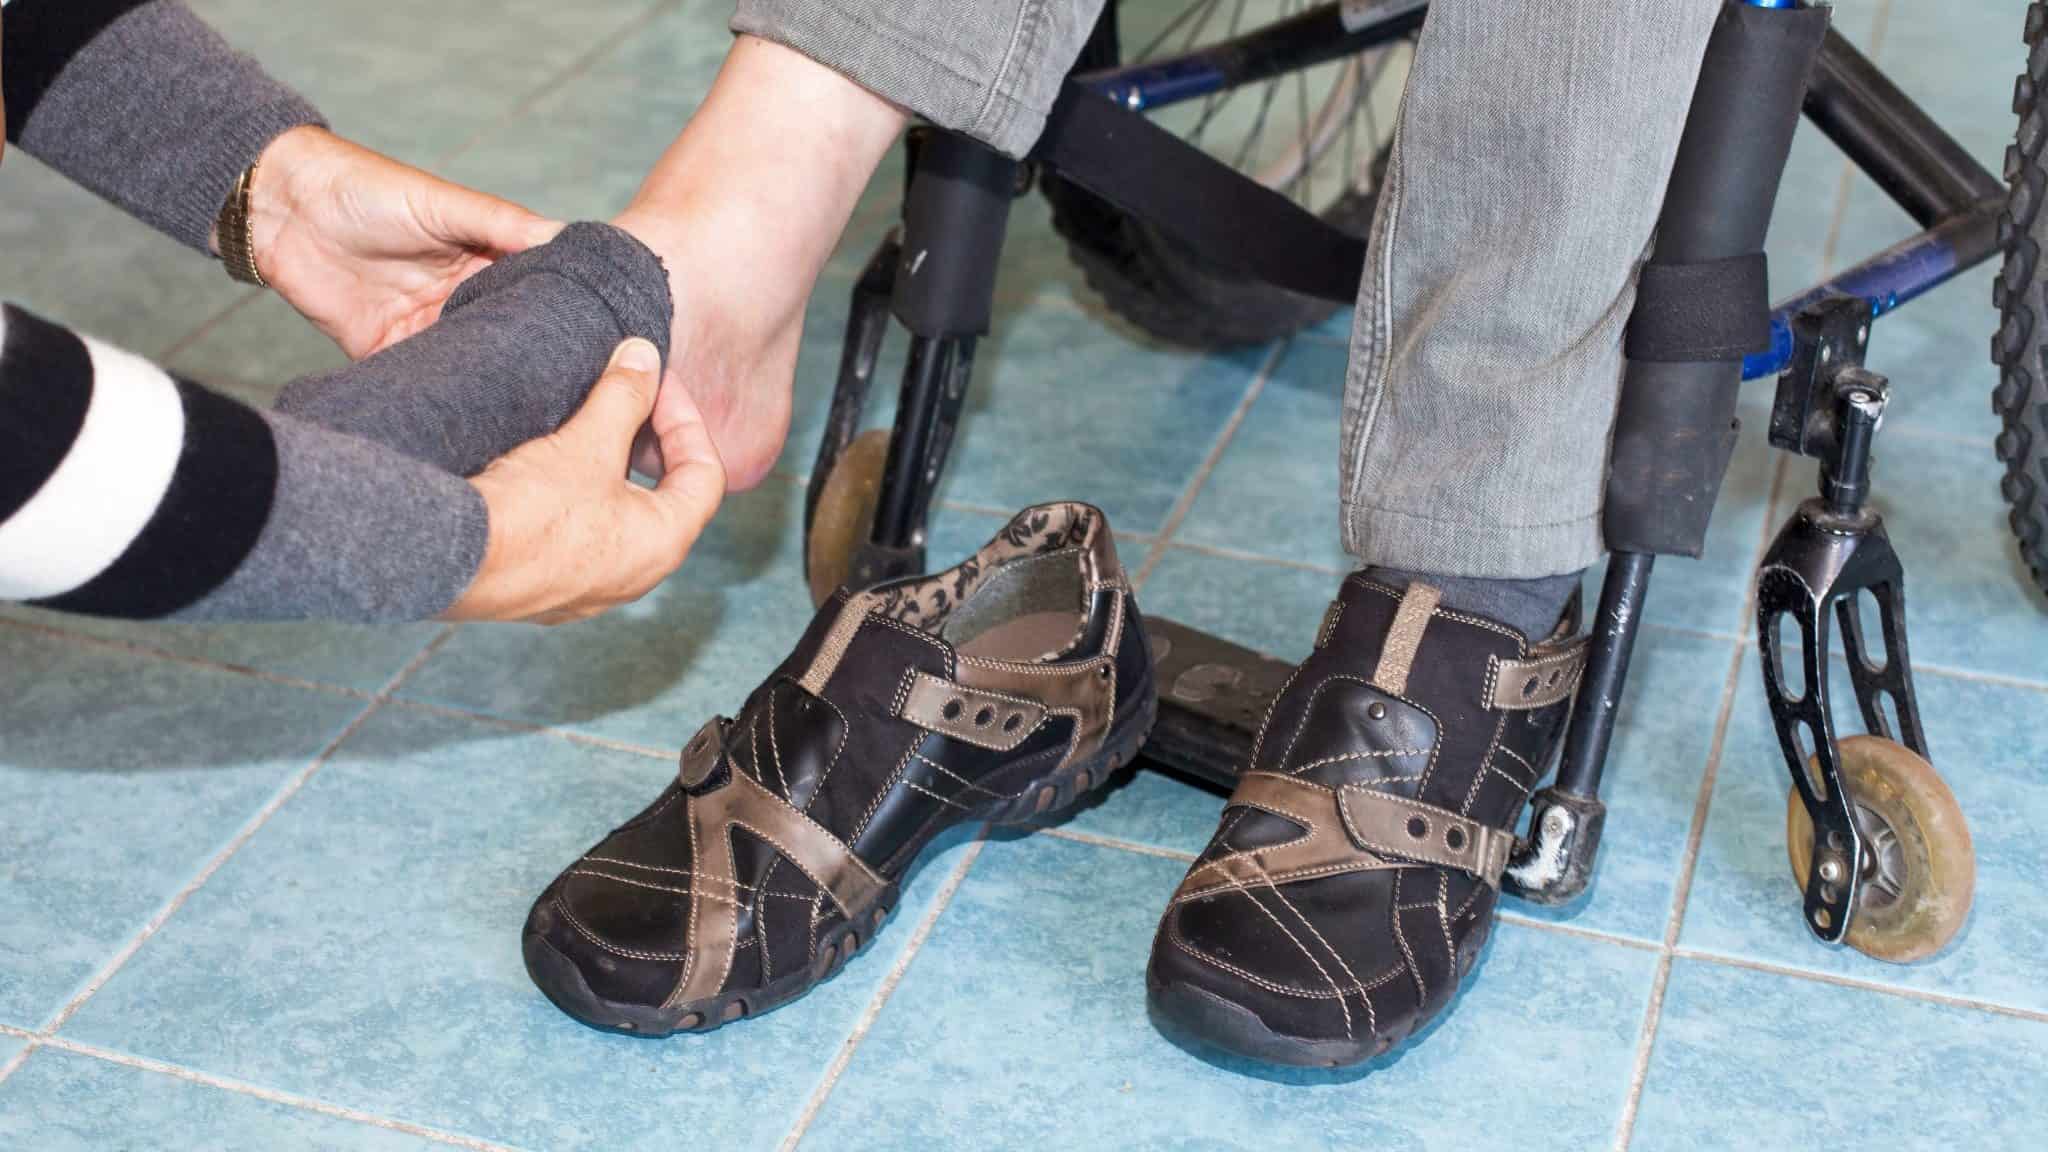 Photo showing a person kneeling down, assisting a person sitting in a wheelchair with putting on a sock.